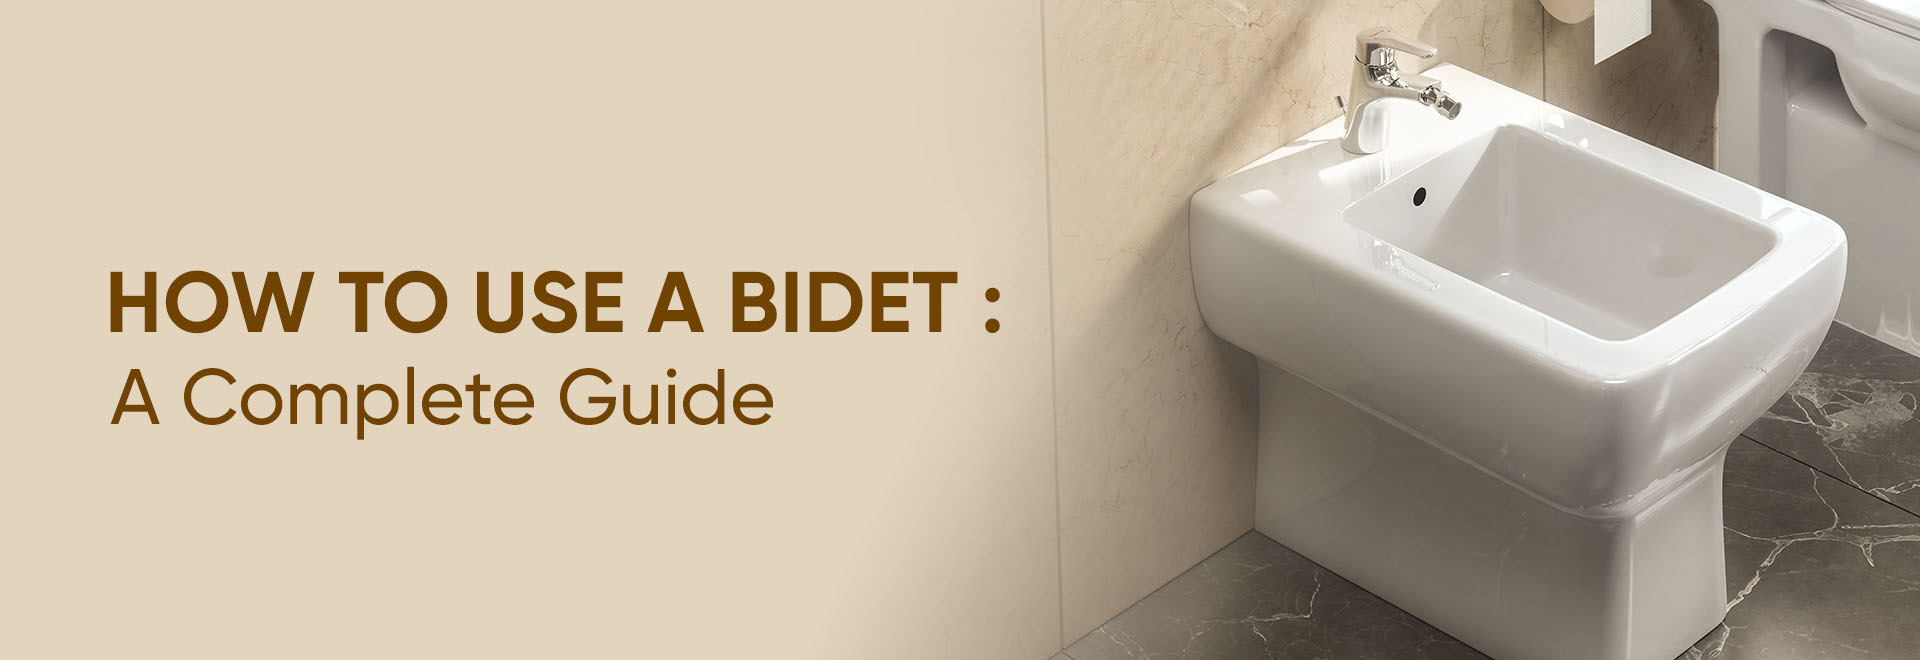 How to Use a Bidet: A Complete Guide